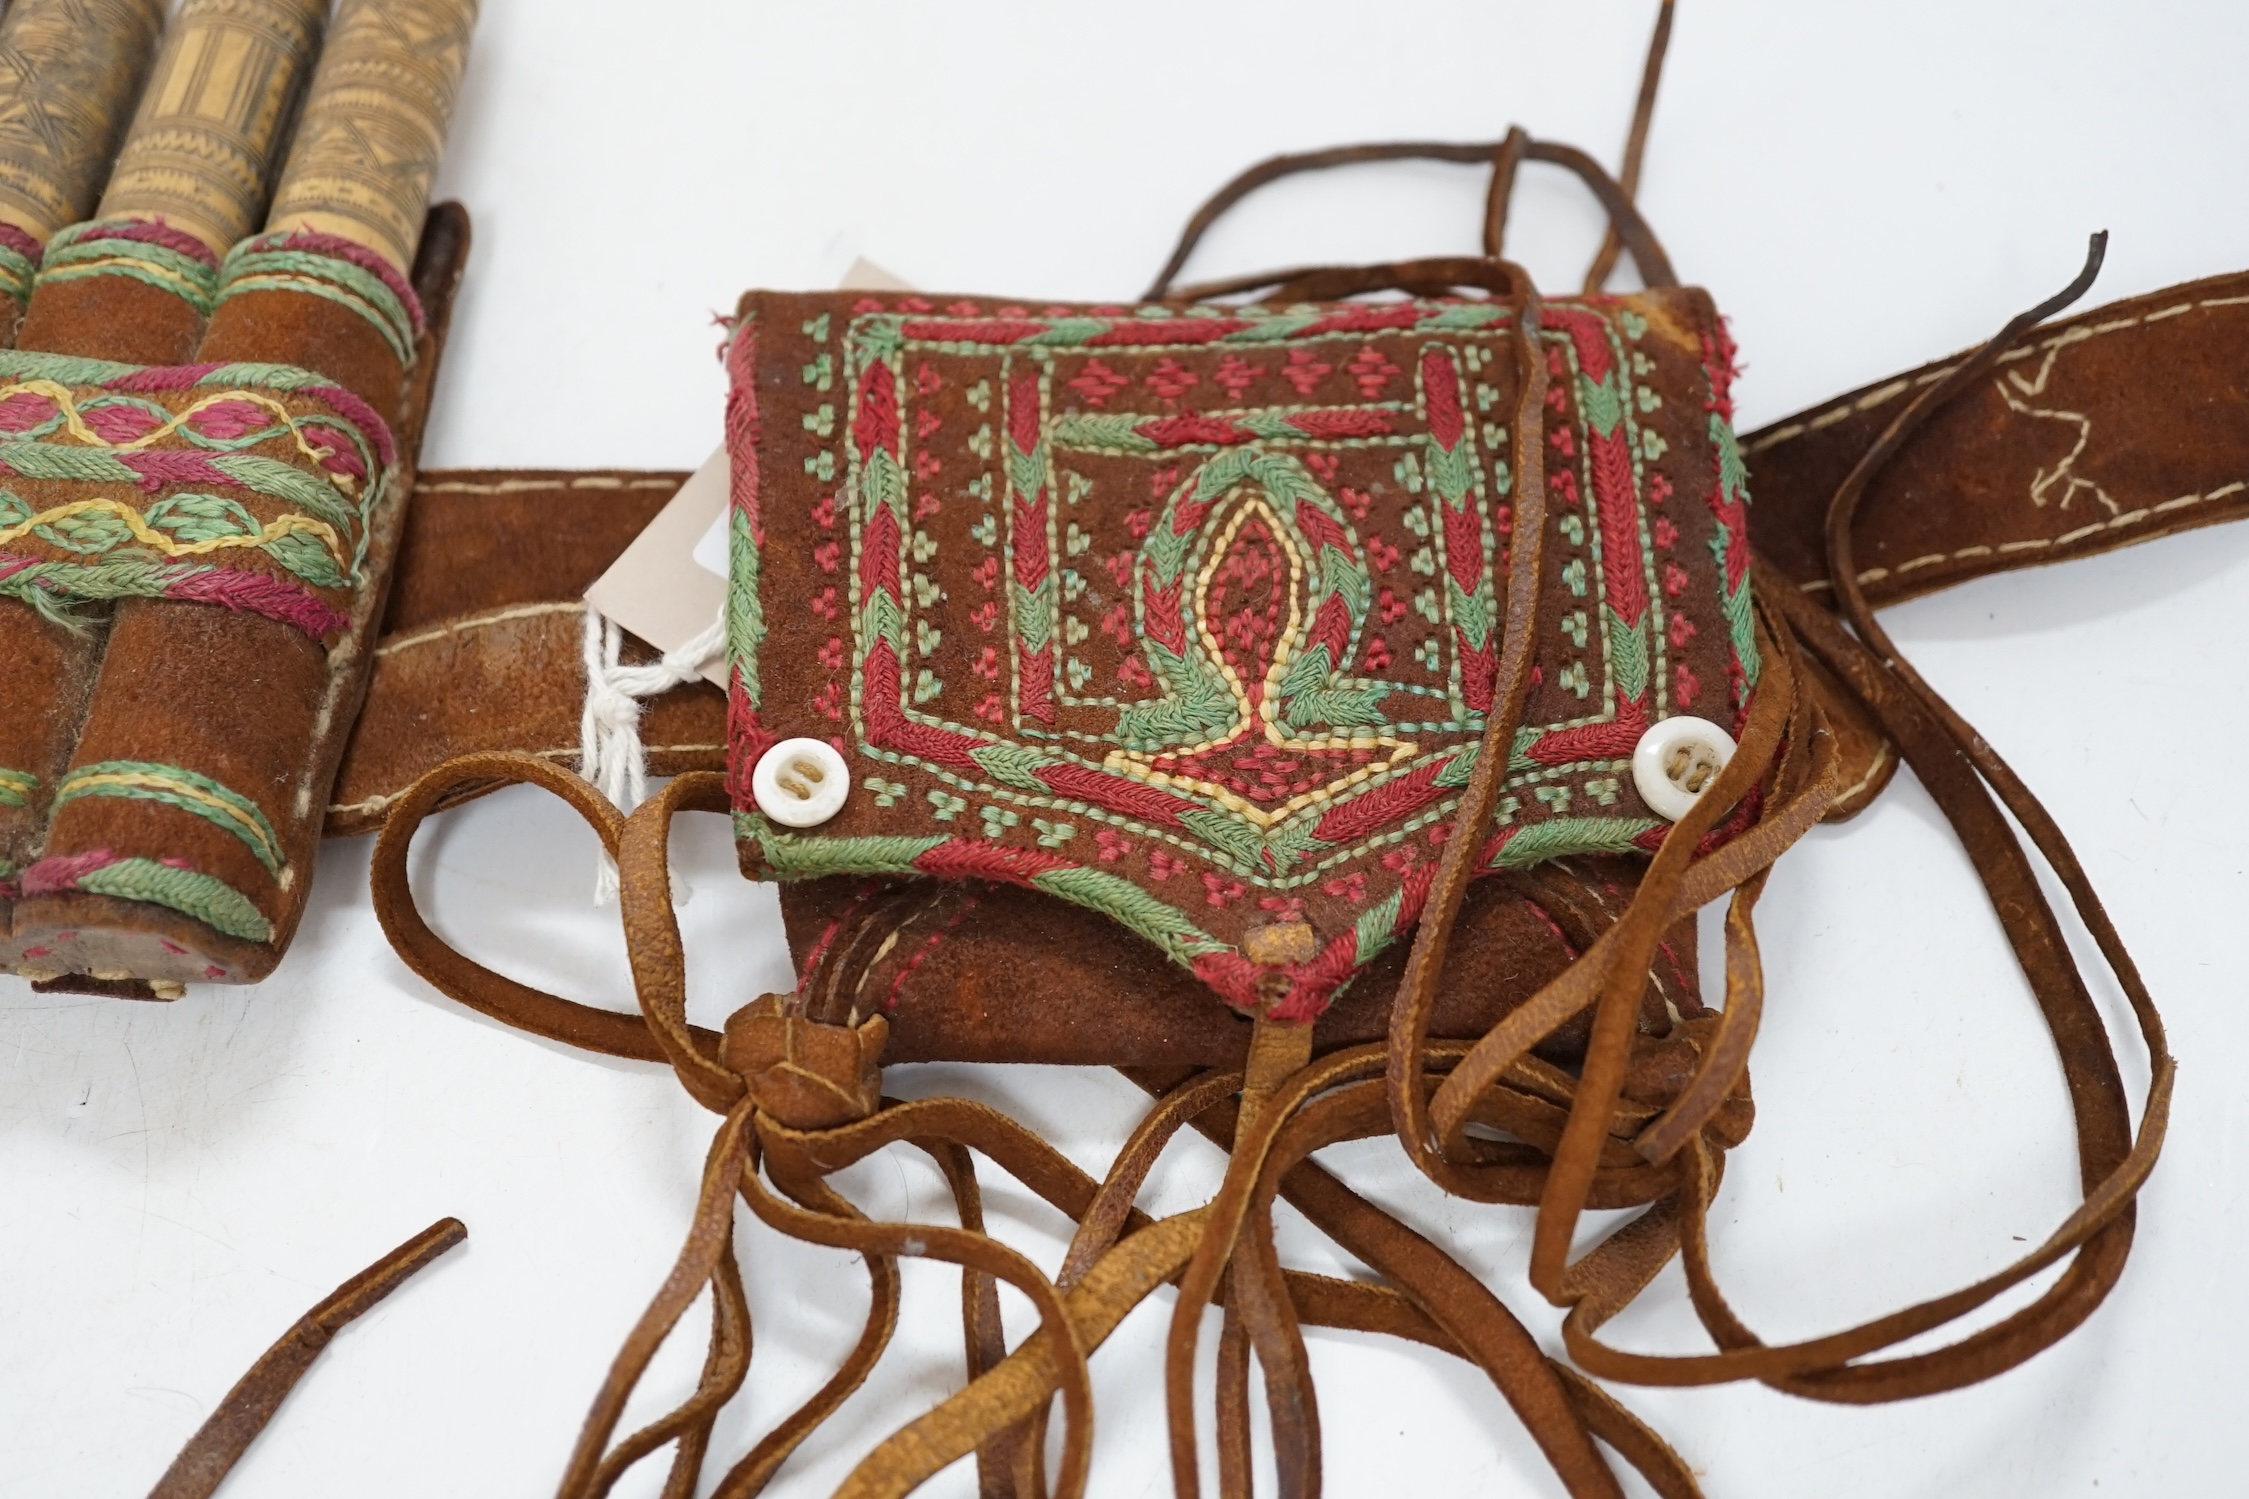 A 19th century Armenian gazyr belt, with decorative silk embroidery on suede and carved bamboo shot and gunpowder containers, 68cm long. Condition - slightly worn from use